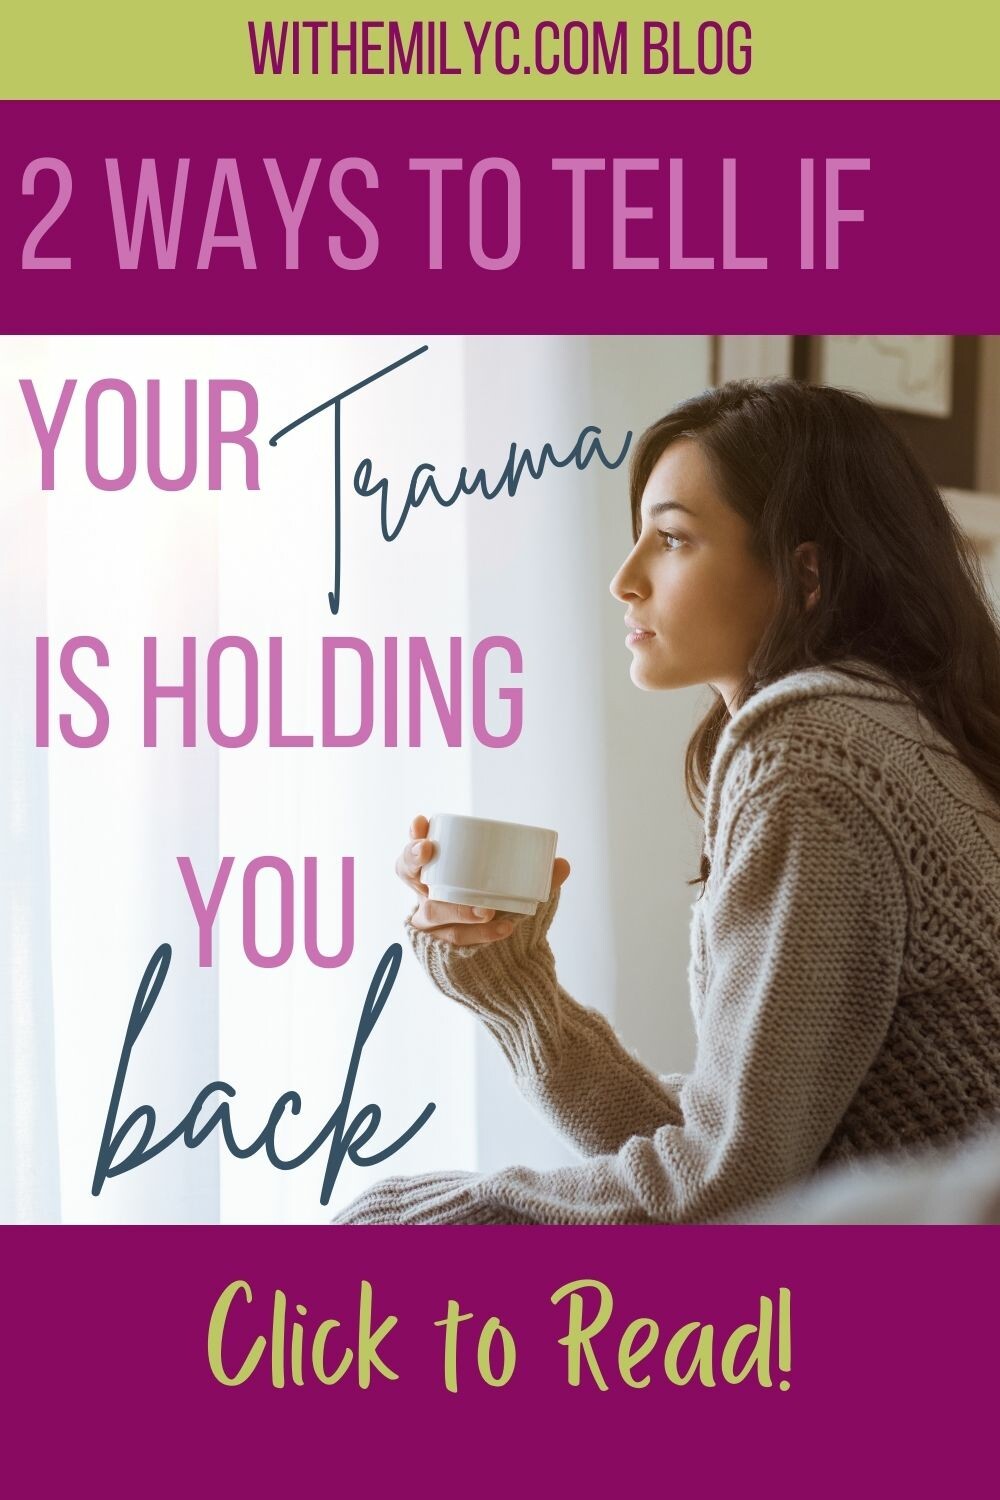 2 Ways to Tell if your Trauma is Holding you Back